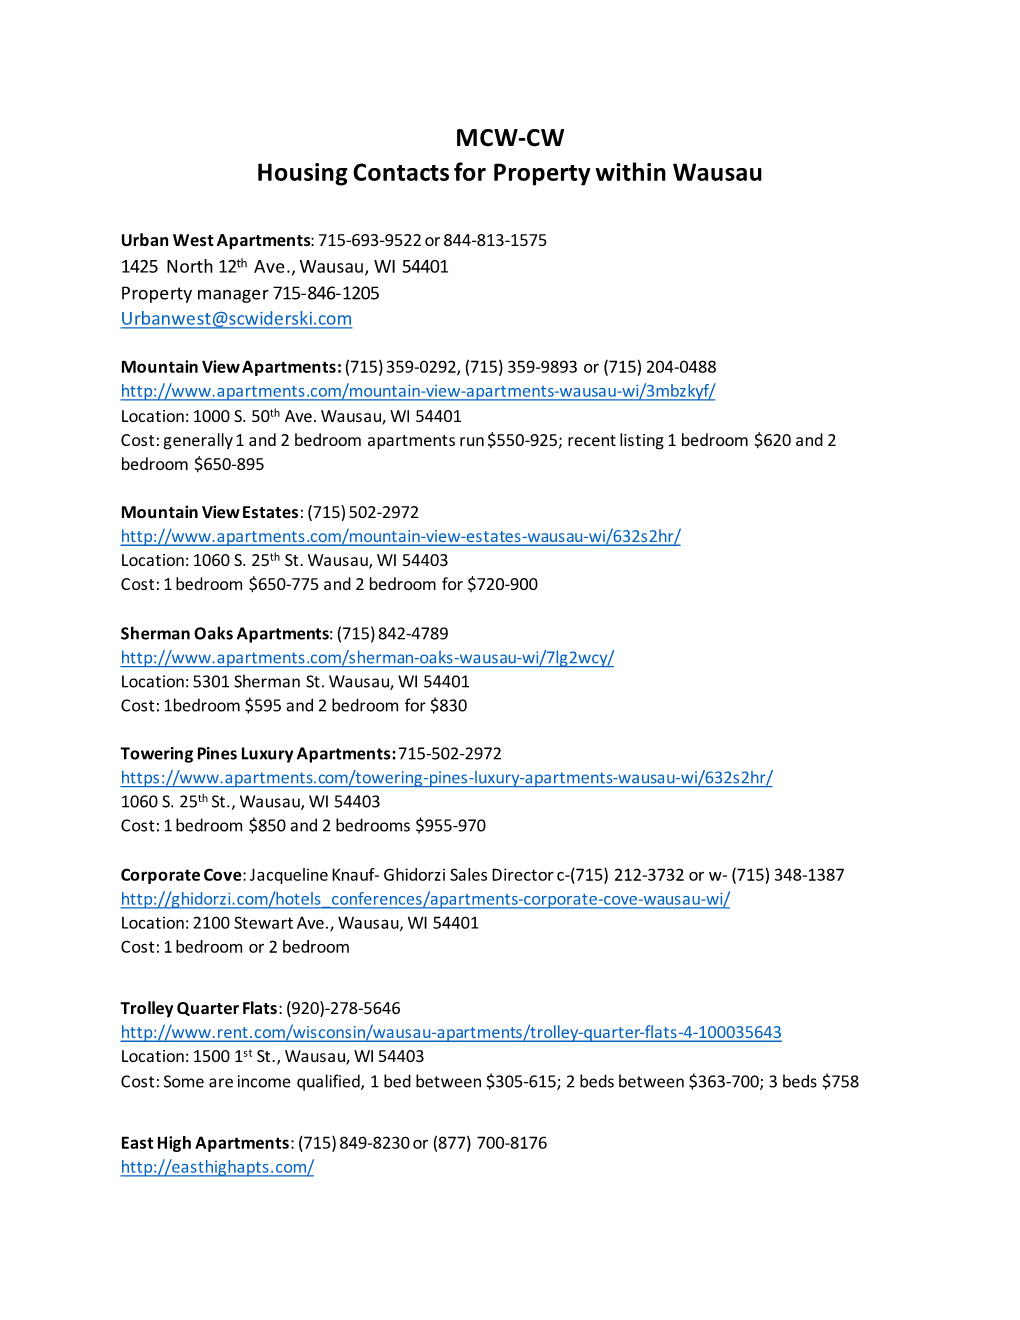 MCW-CW Housing Contacts for Property Within Wausau